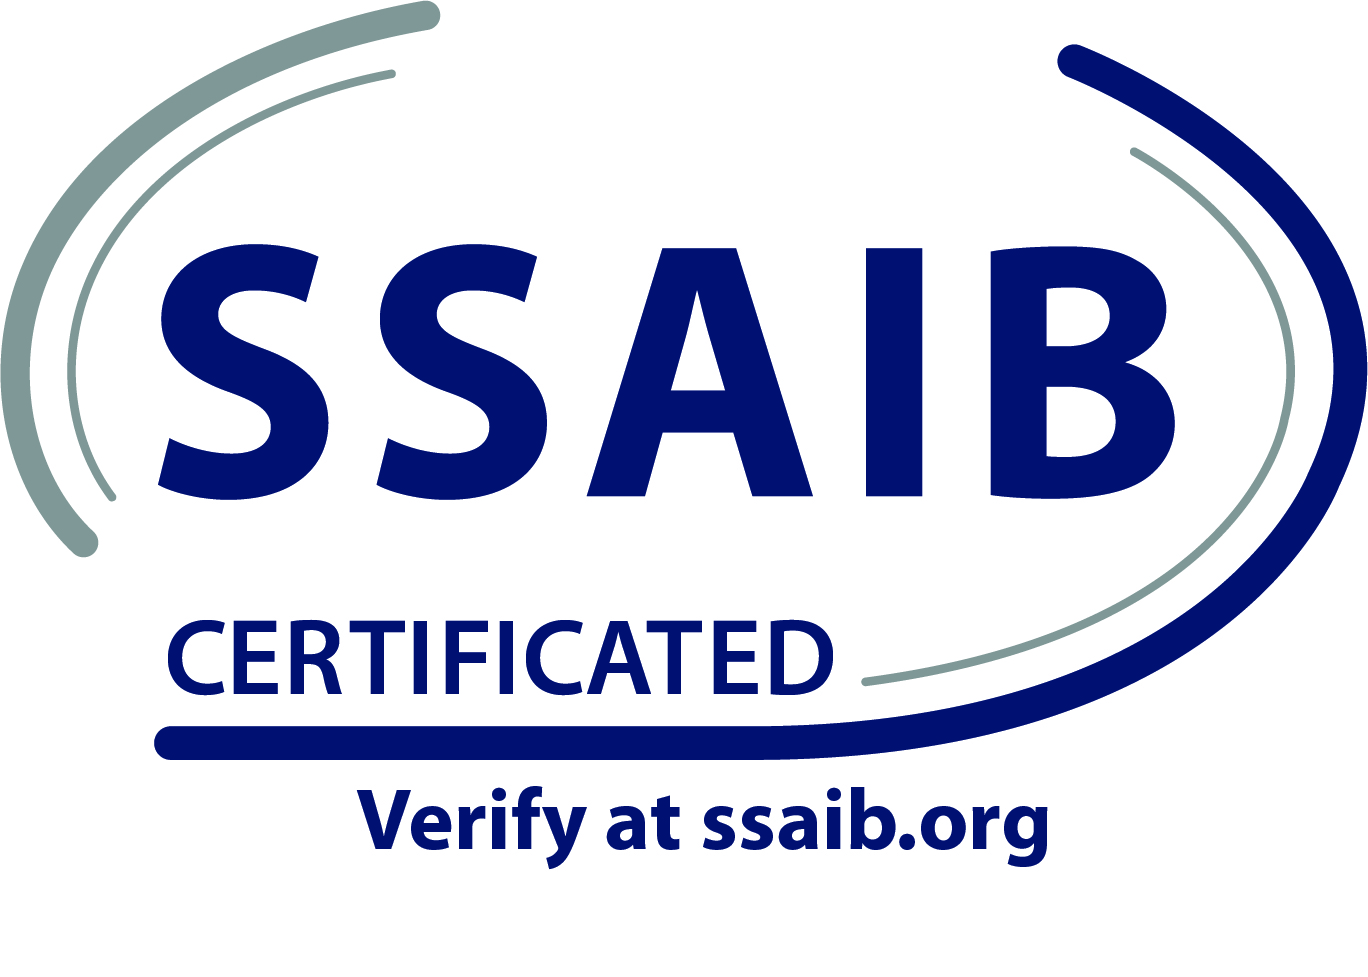 The logo for SSAIB